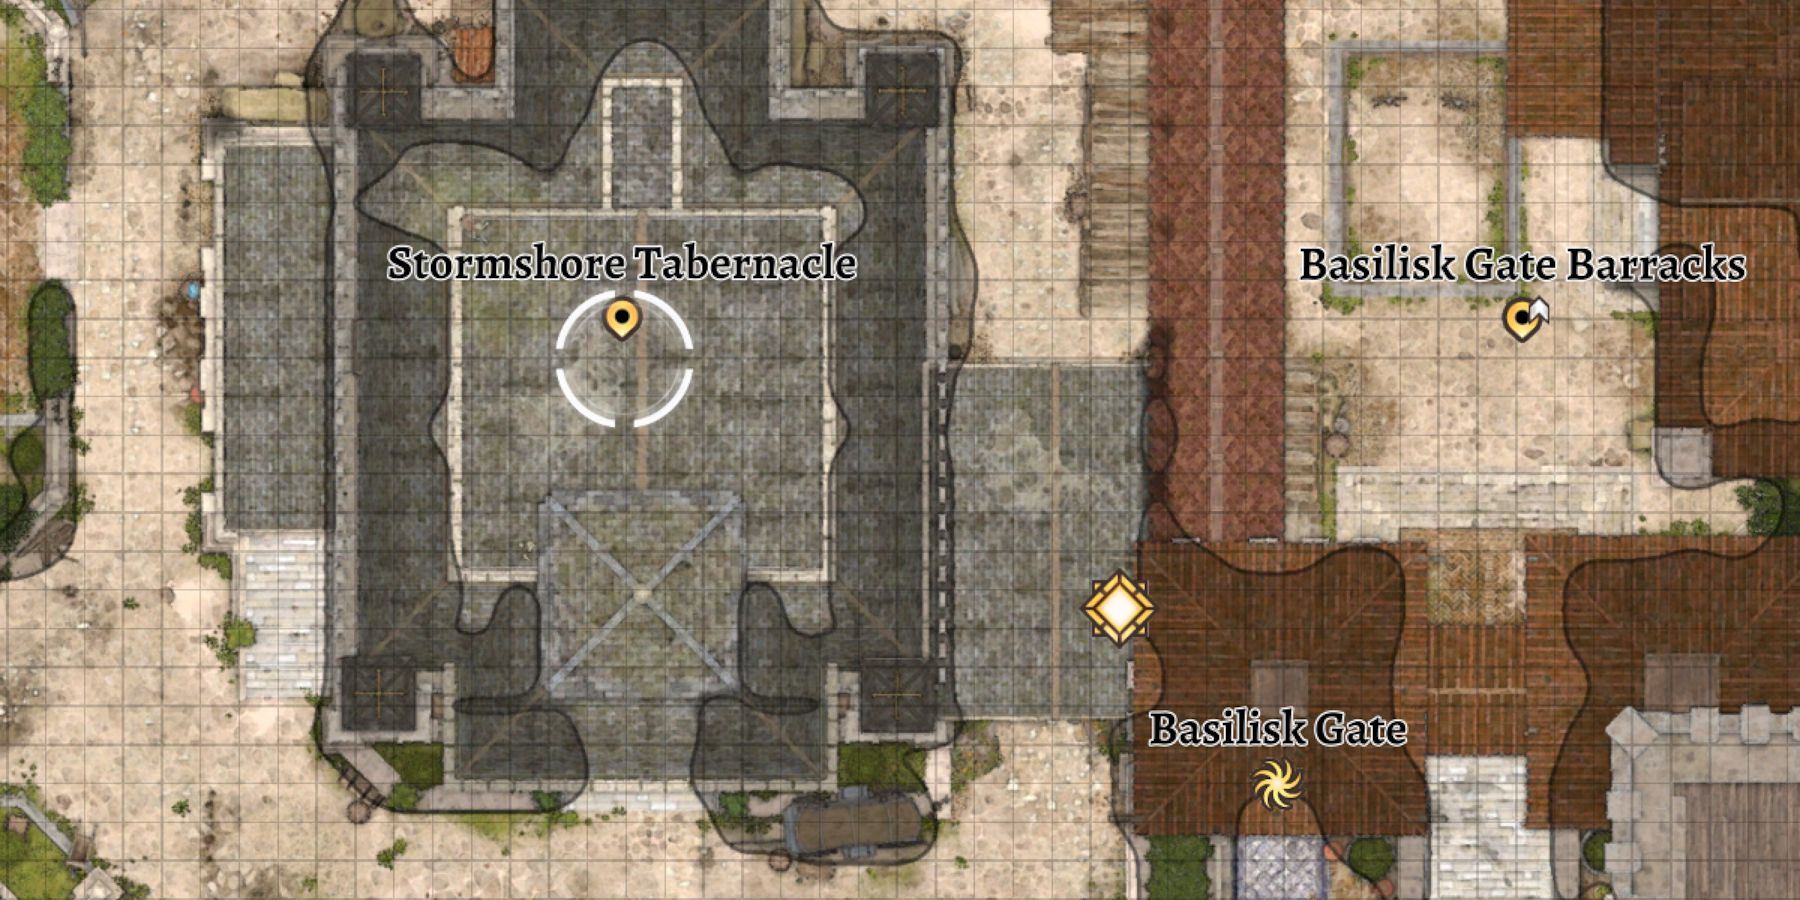 The Stormshore Tabernacle is labeled on the map